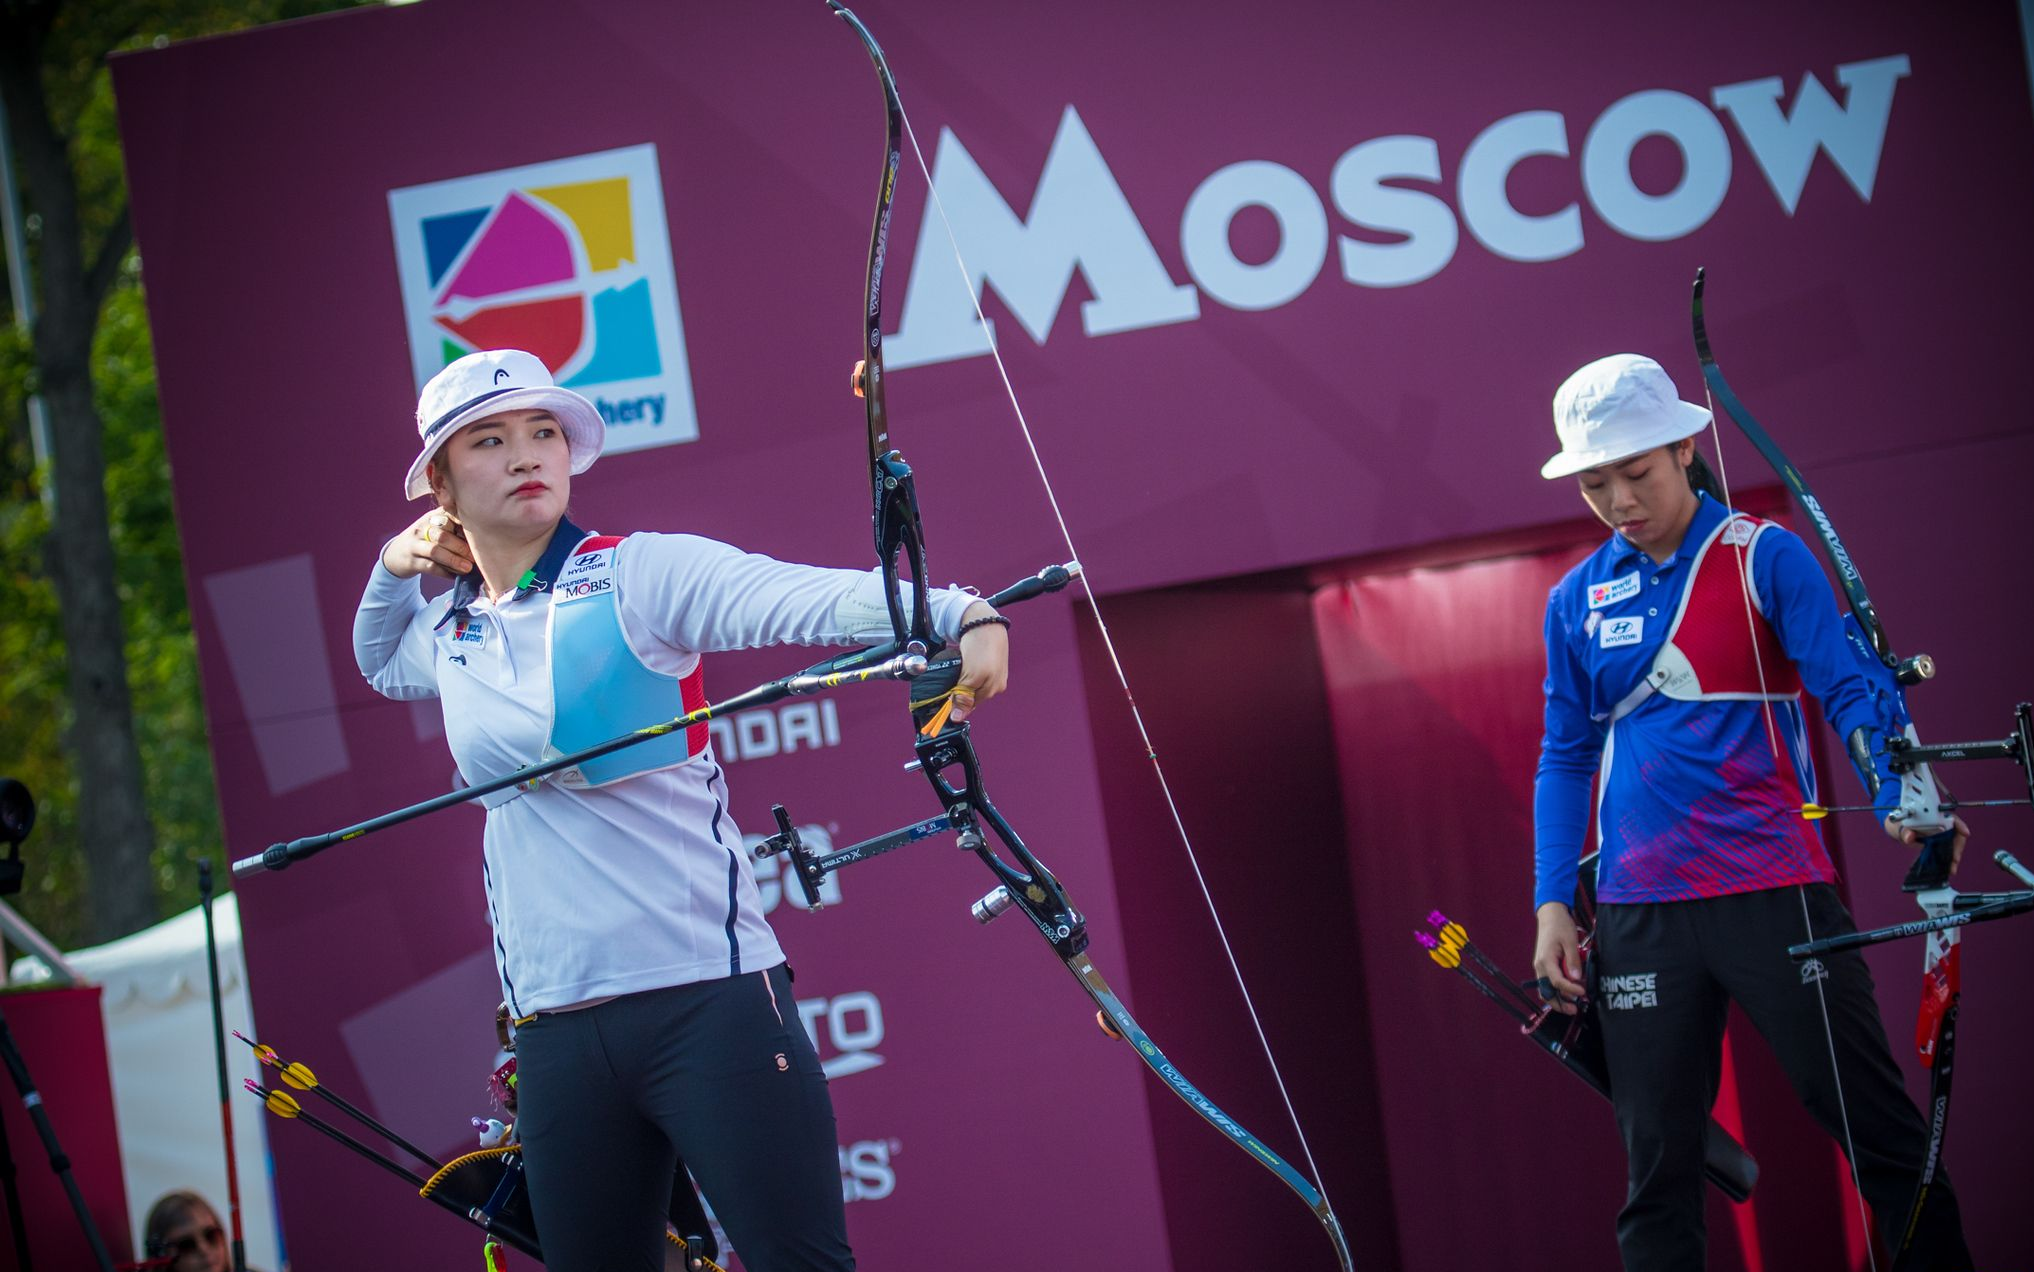 Kang and Ellison crowned recurve champions at Archery World Cup Final